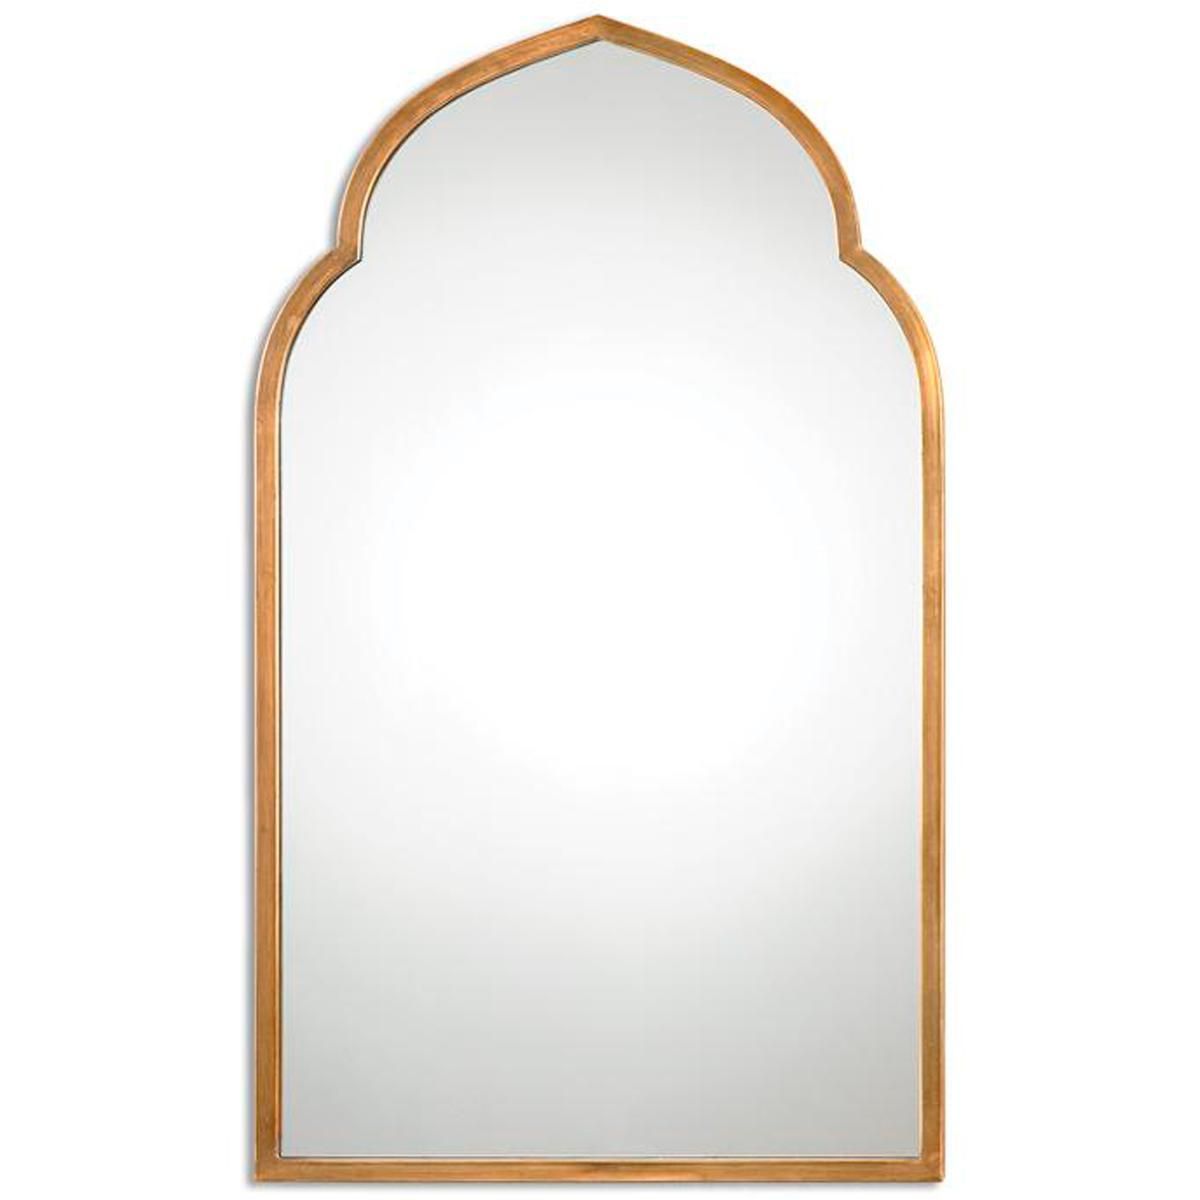 Golden Arabesque Mirror | Mirrors In 2019 | Arch Mirror With Regard To Gold Arch Wall Mirrors (View 1 of 20)